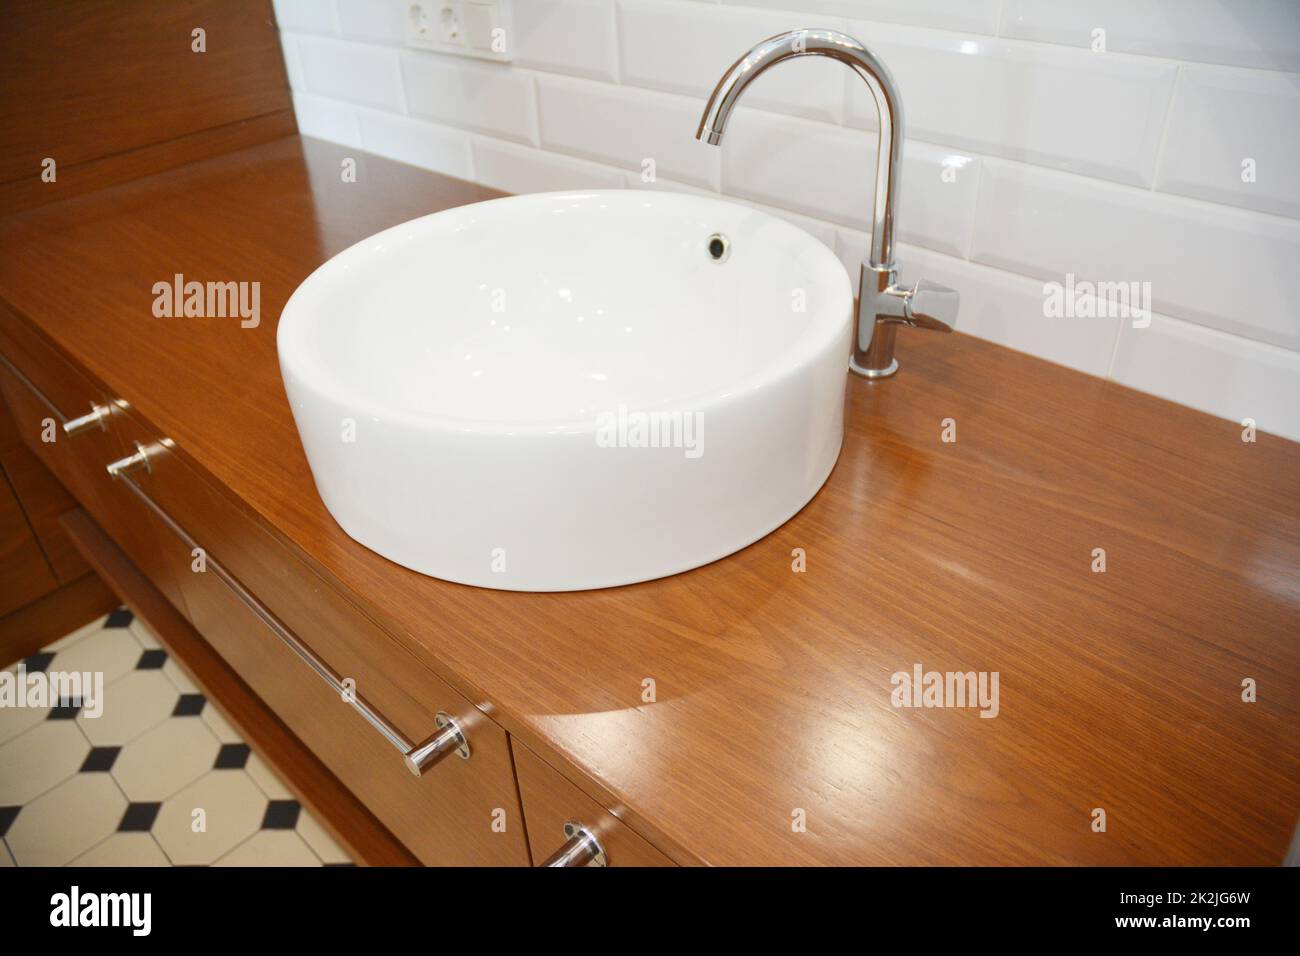 Bathroom ceramic sink with chome water tap and wooden table. Stock Photo